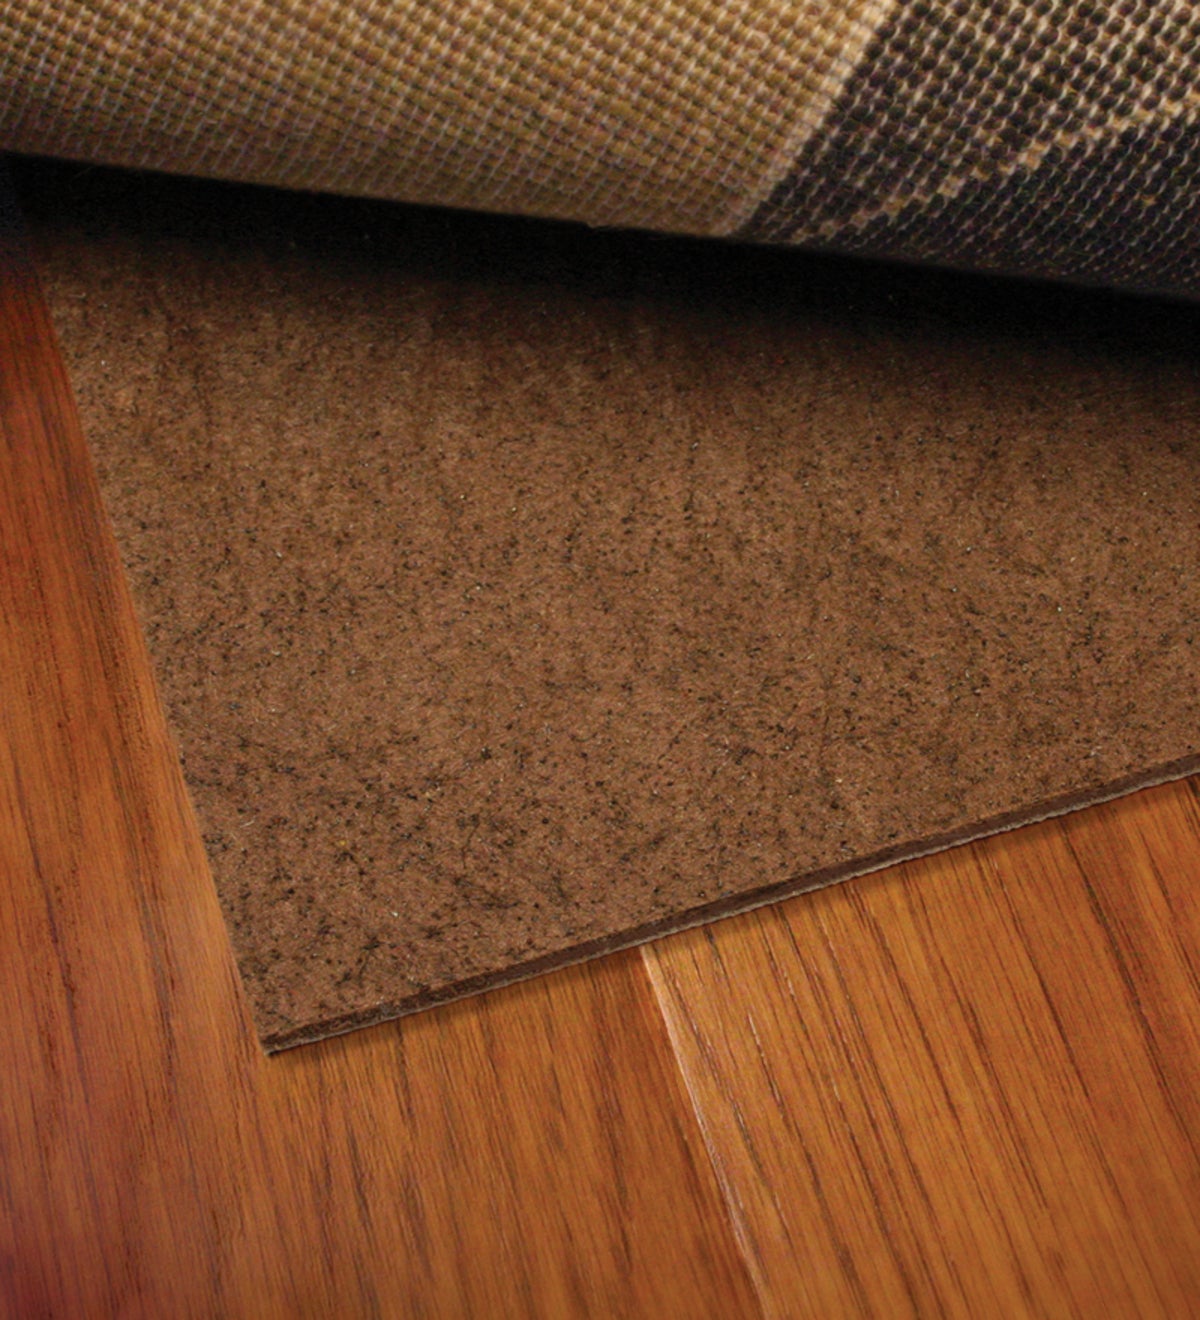 Luxehold Rug Pad Plus Plowhearth, Area Rug Pads For Laminate Floors